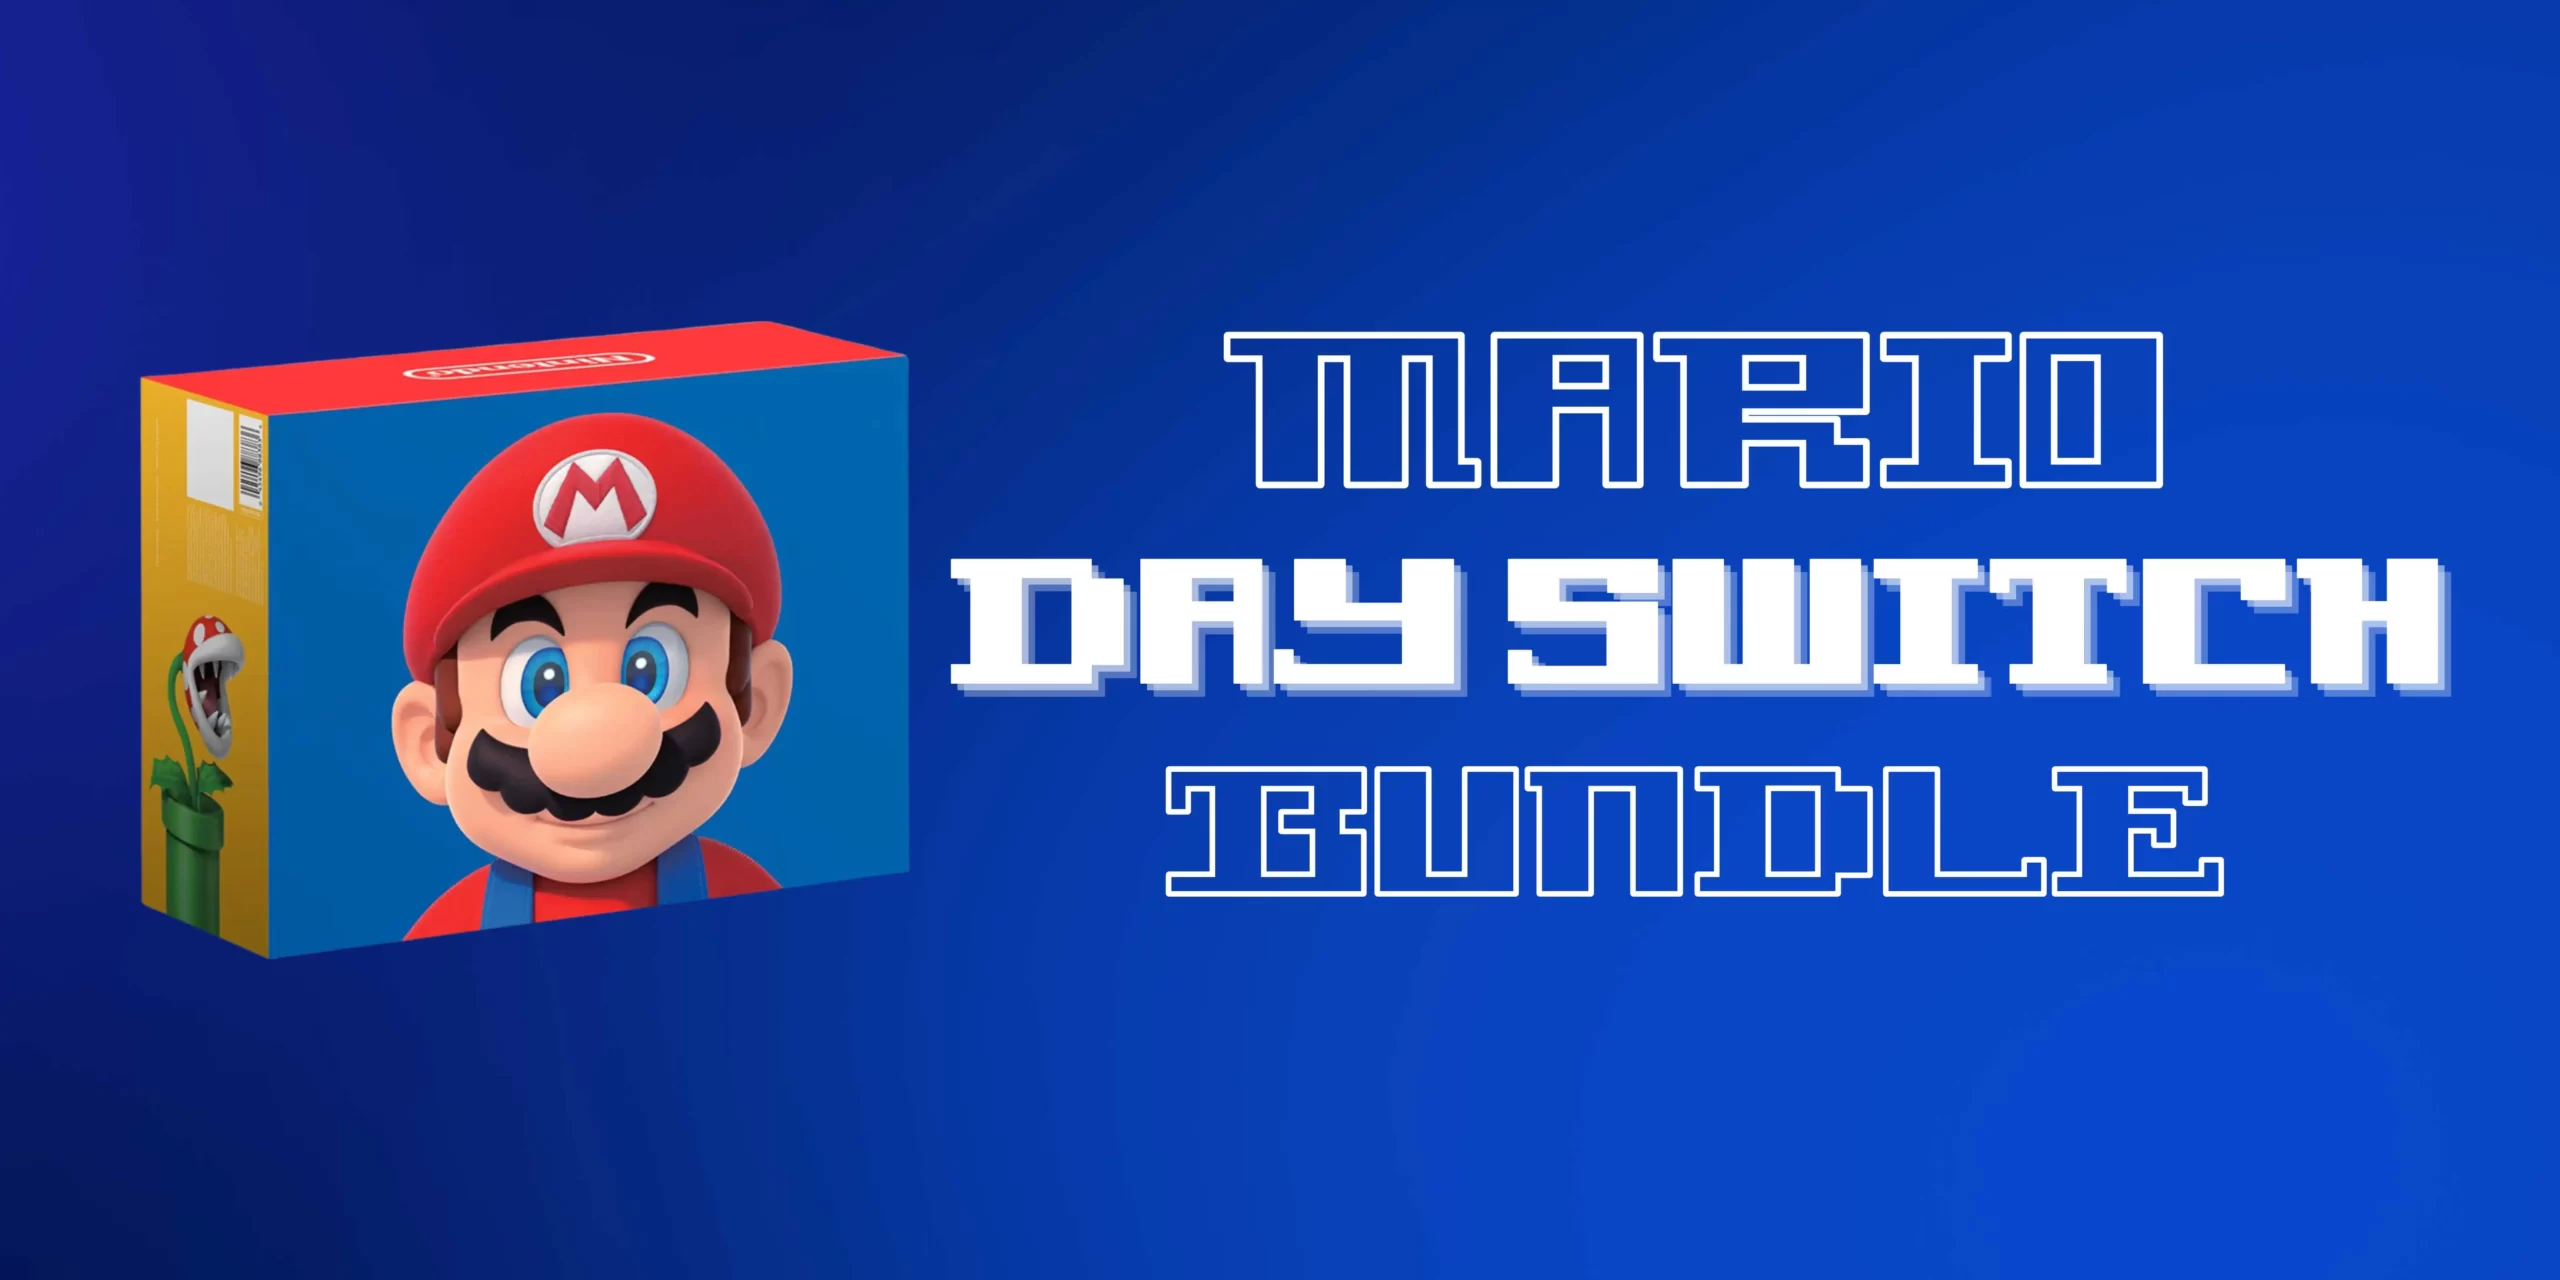 The Mario Day Switch bundle from Nintendo comes with a free game